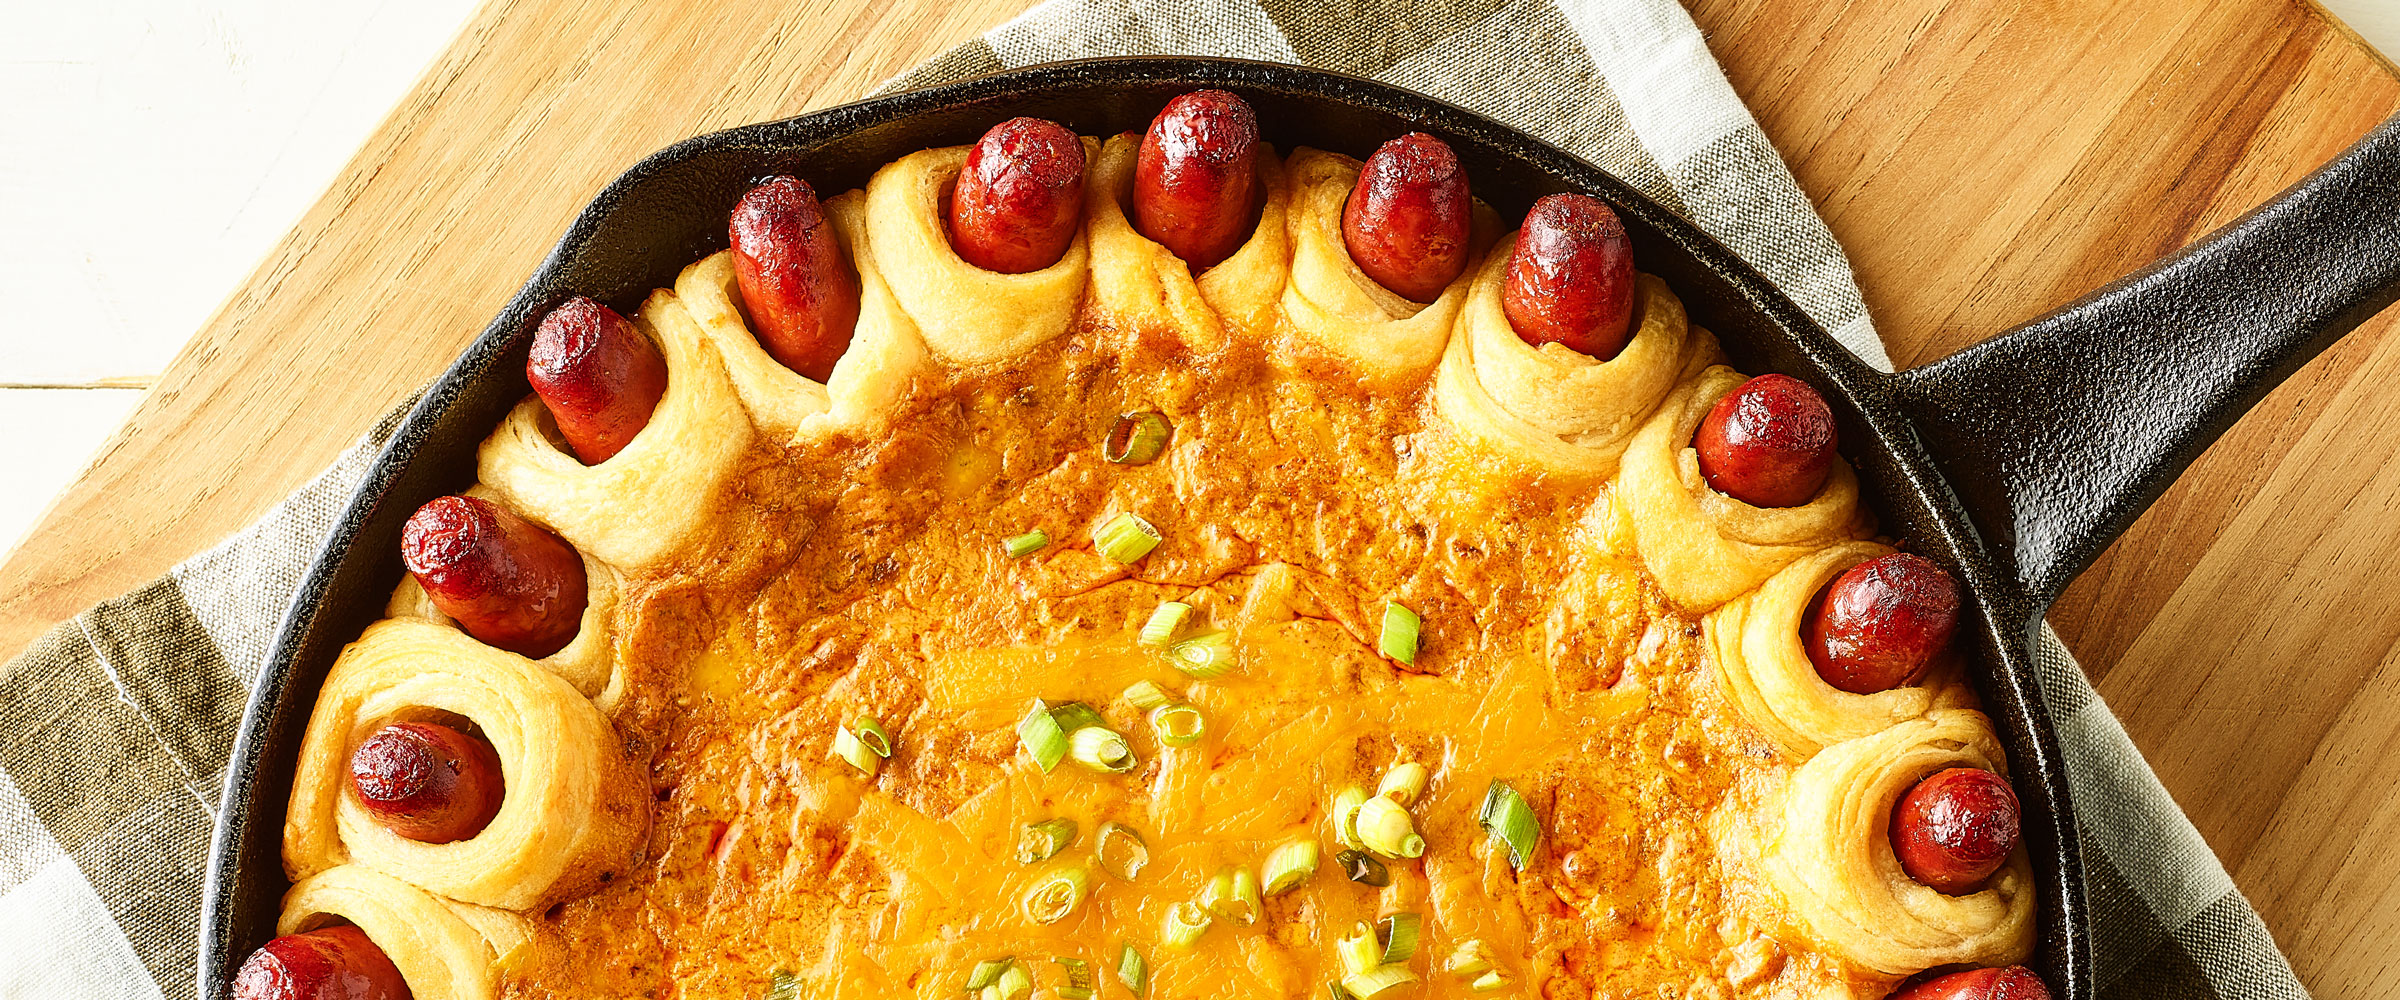 Chili Cheese dip in cast iron skillet with slices of hot dogs in pastry around the edge